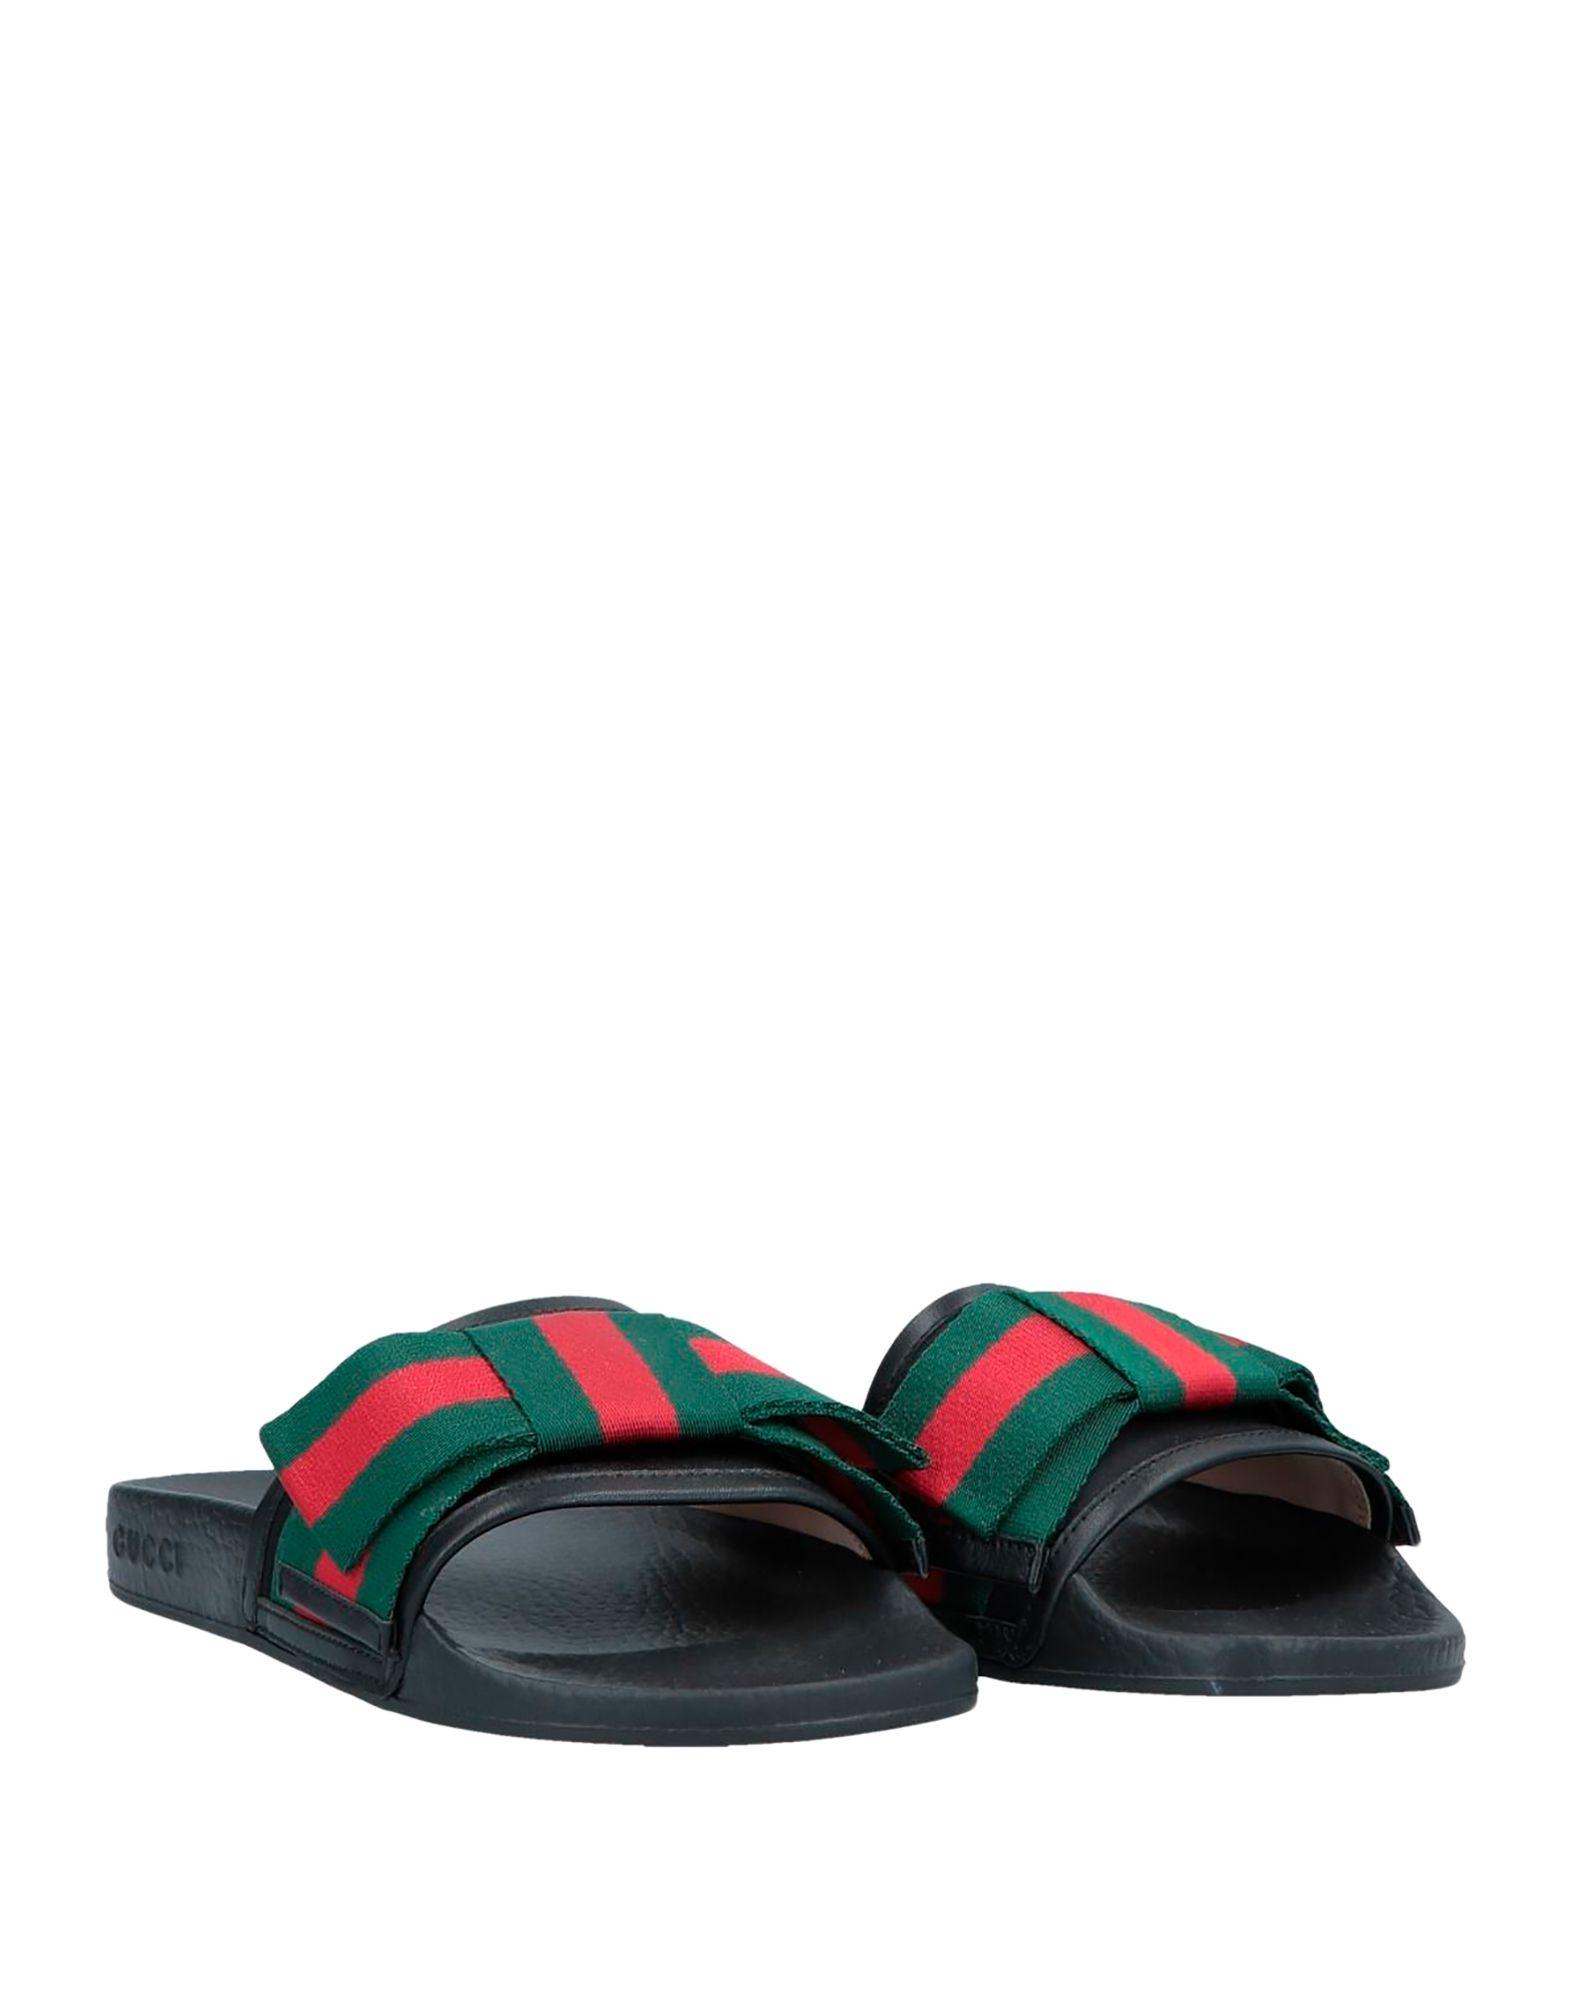 Gucci Satin Flat Pursuit Slide With Bow in Black | Lyst